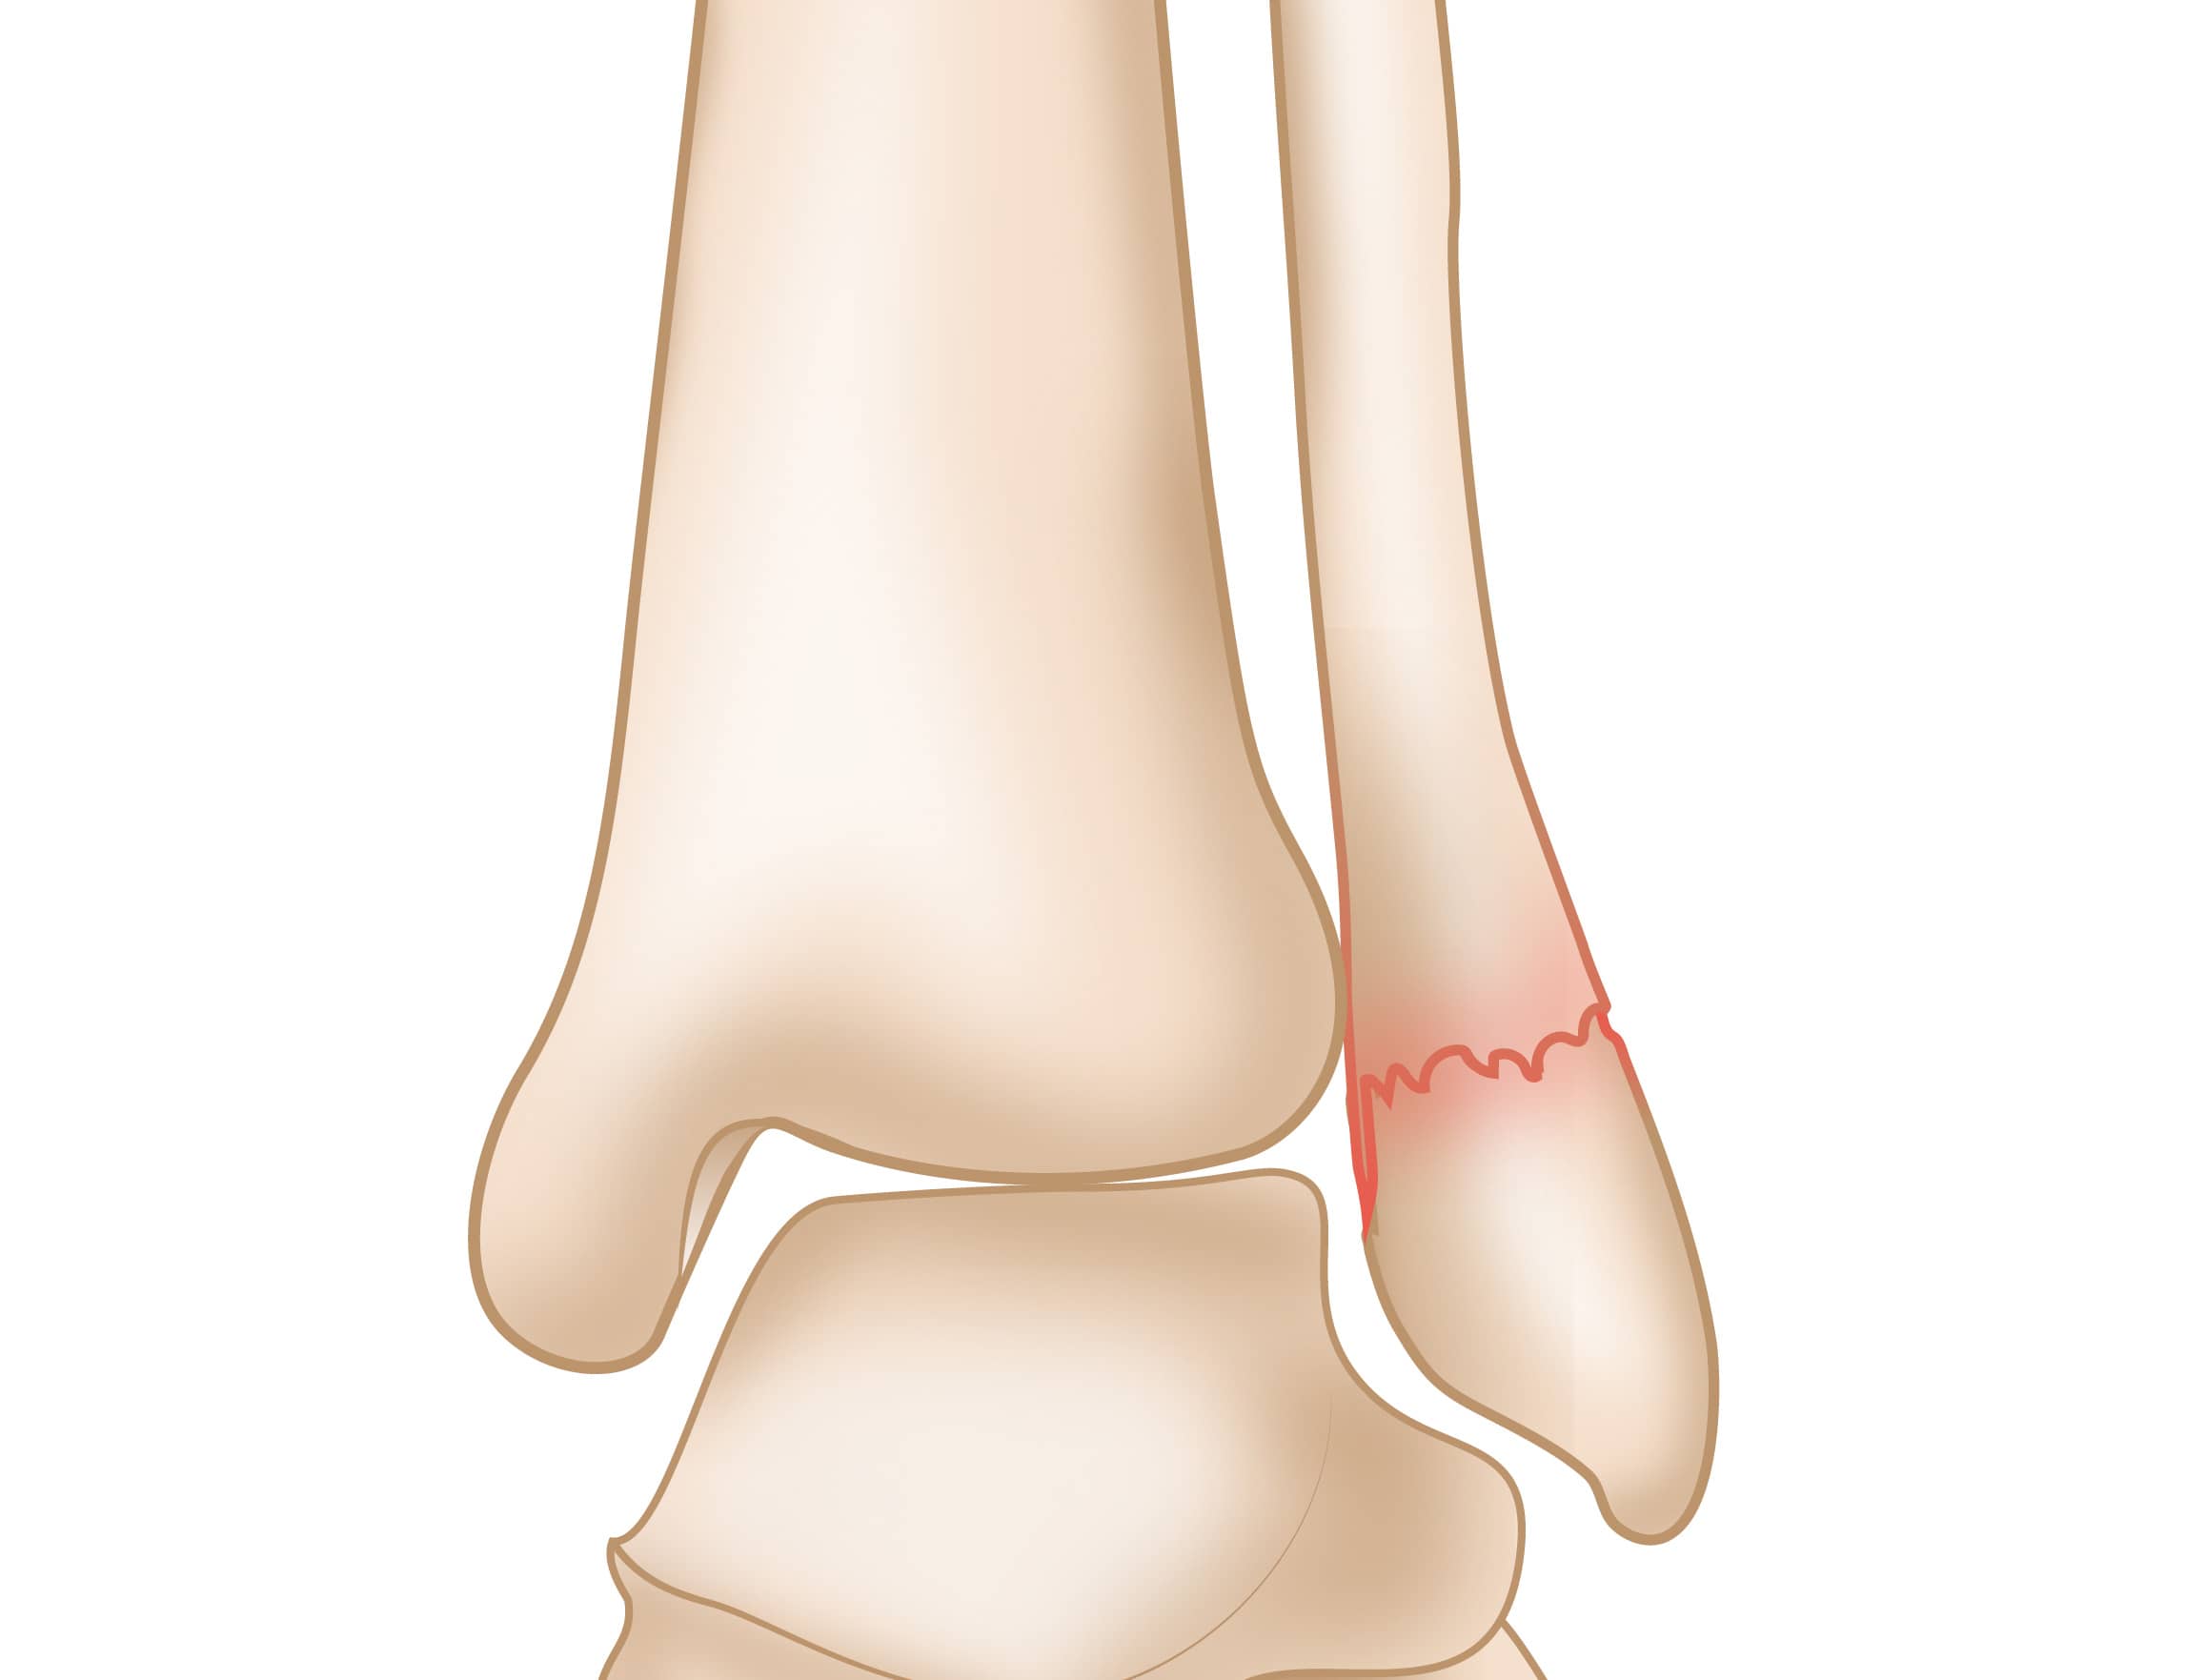 Nondisplaced Lateral Malleolus Fracture